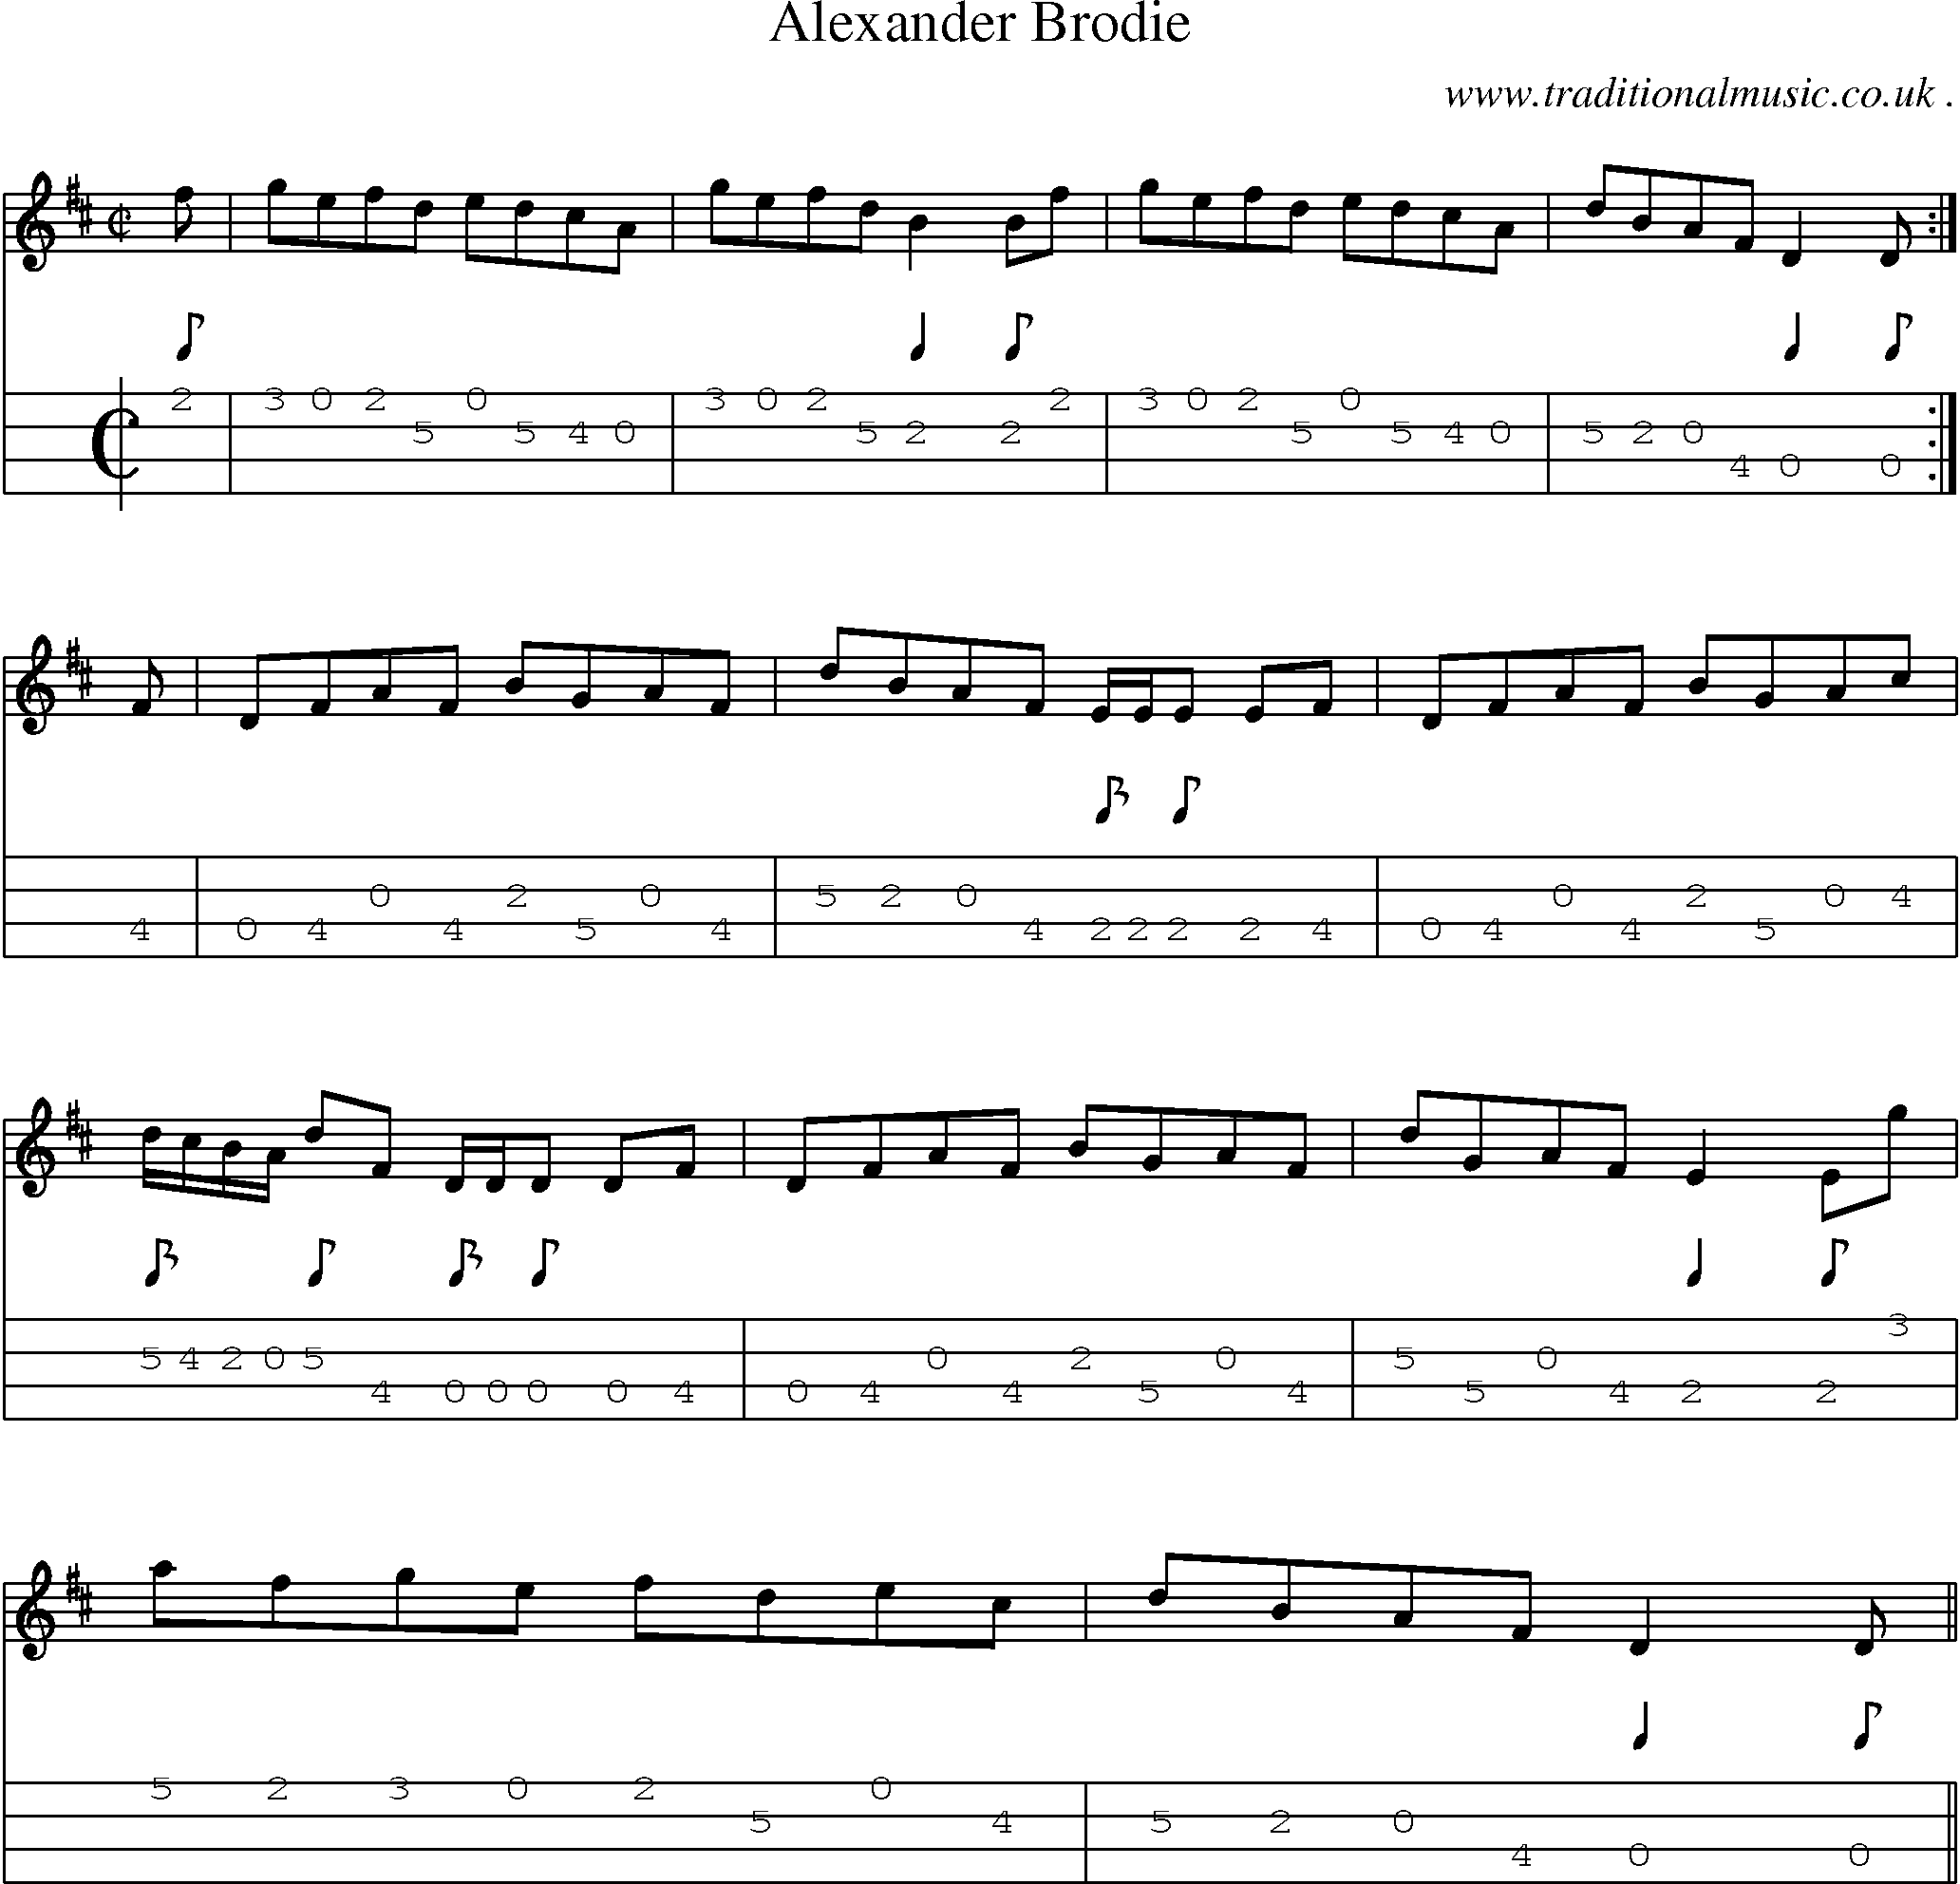 Sheet-music  score, Chords and Mandolin Tabs for Alexander Brodie